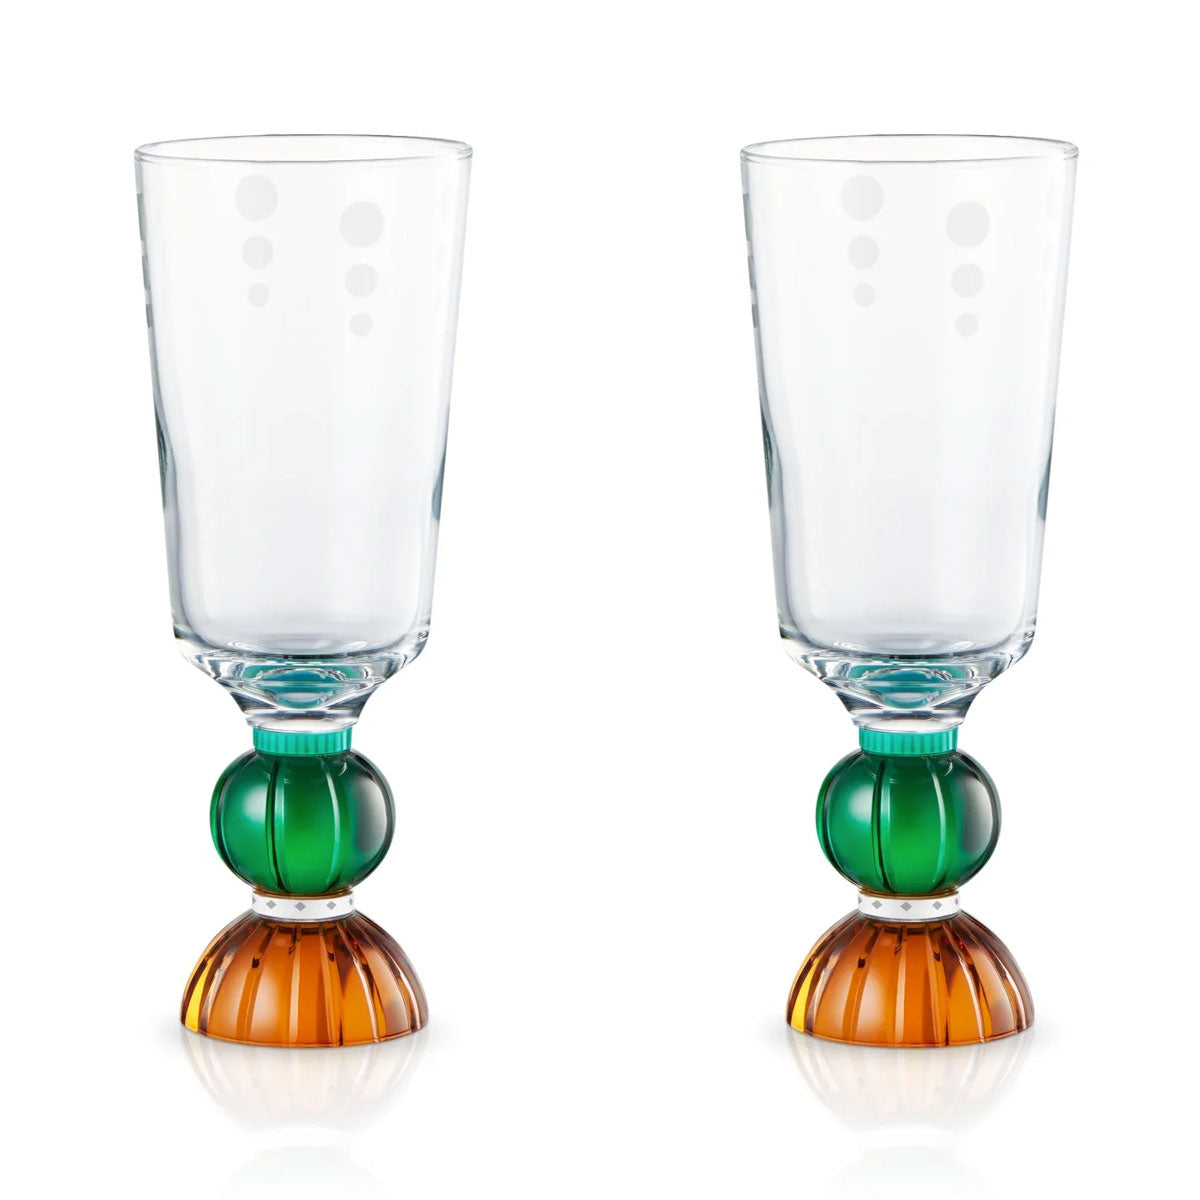 Windsor Tall Crystal Glasses Set of 2 Clear/Emerald/Brown/Mint - Reflections Copenhagen